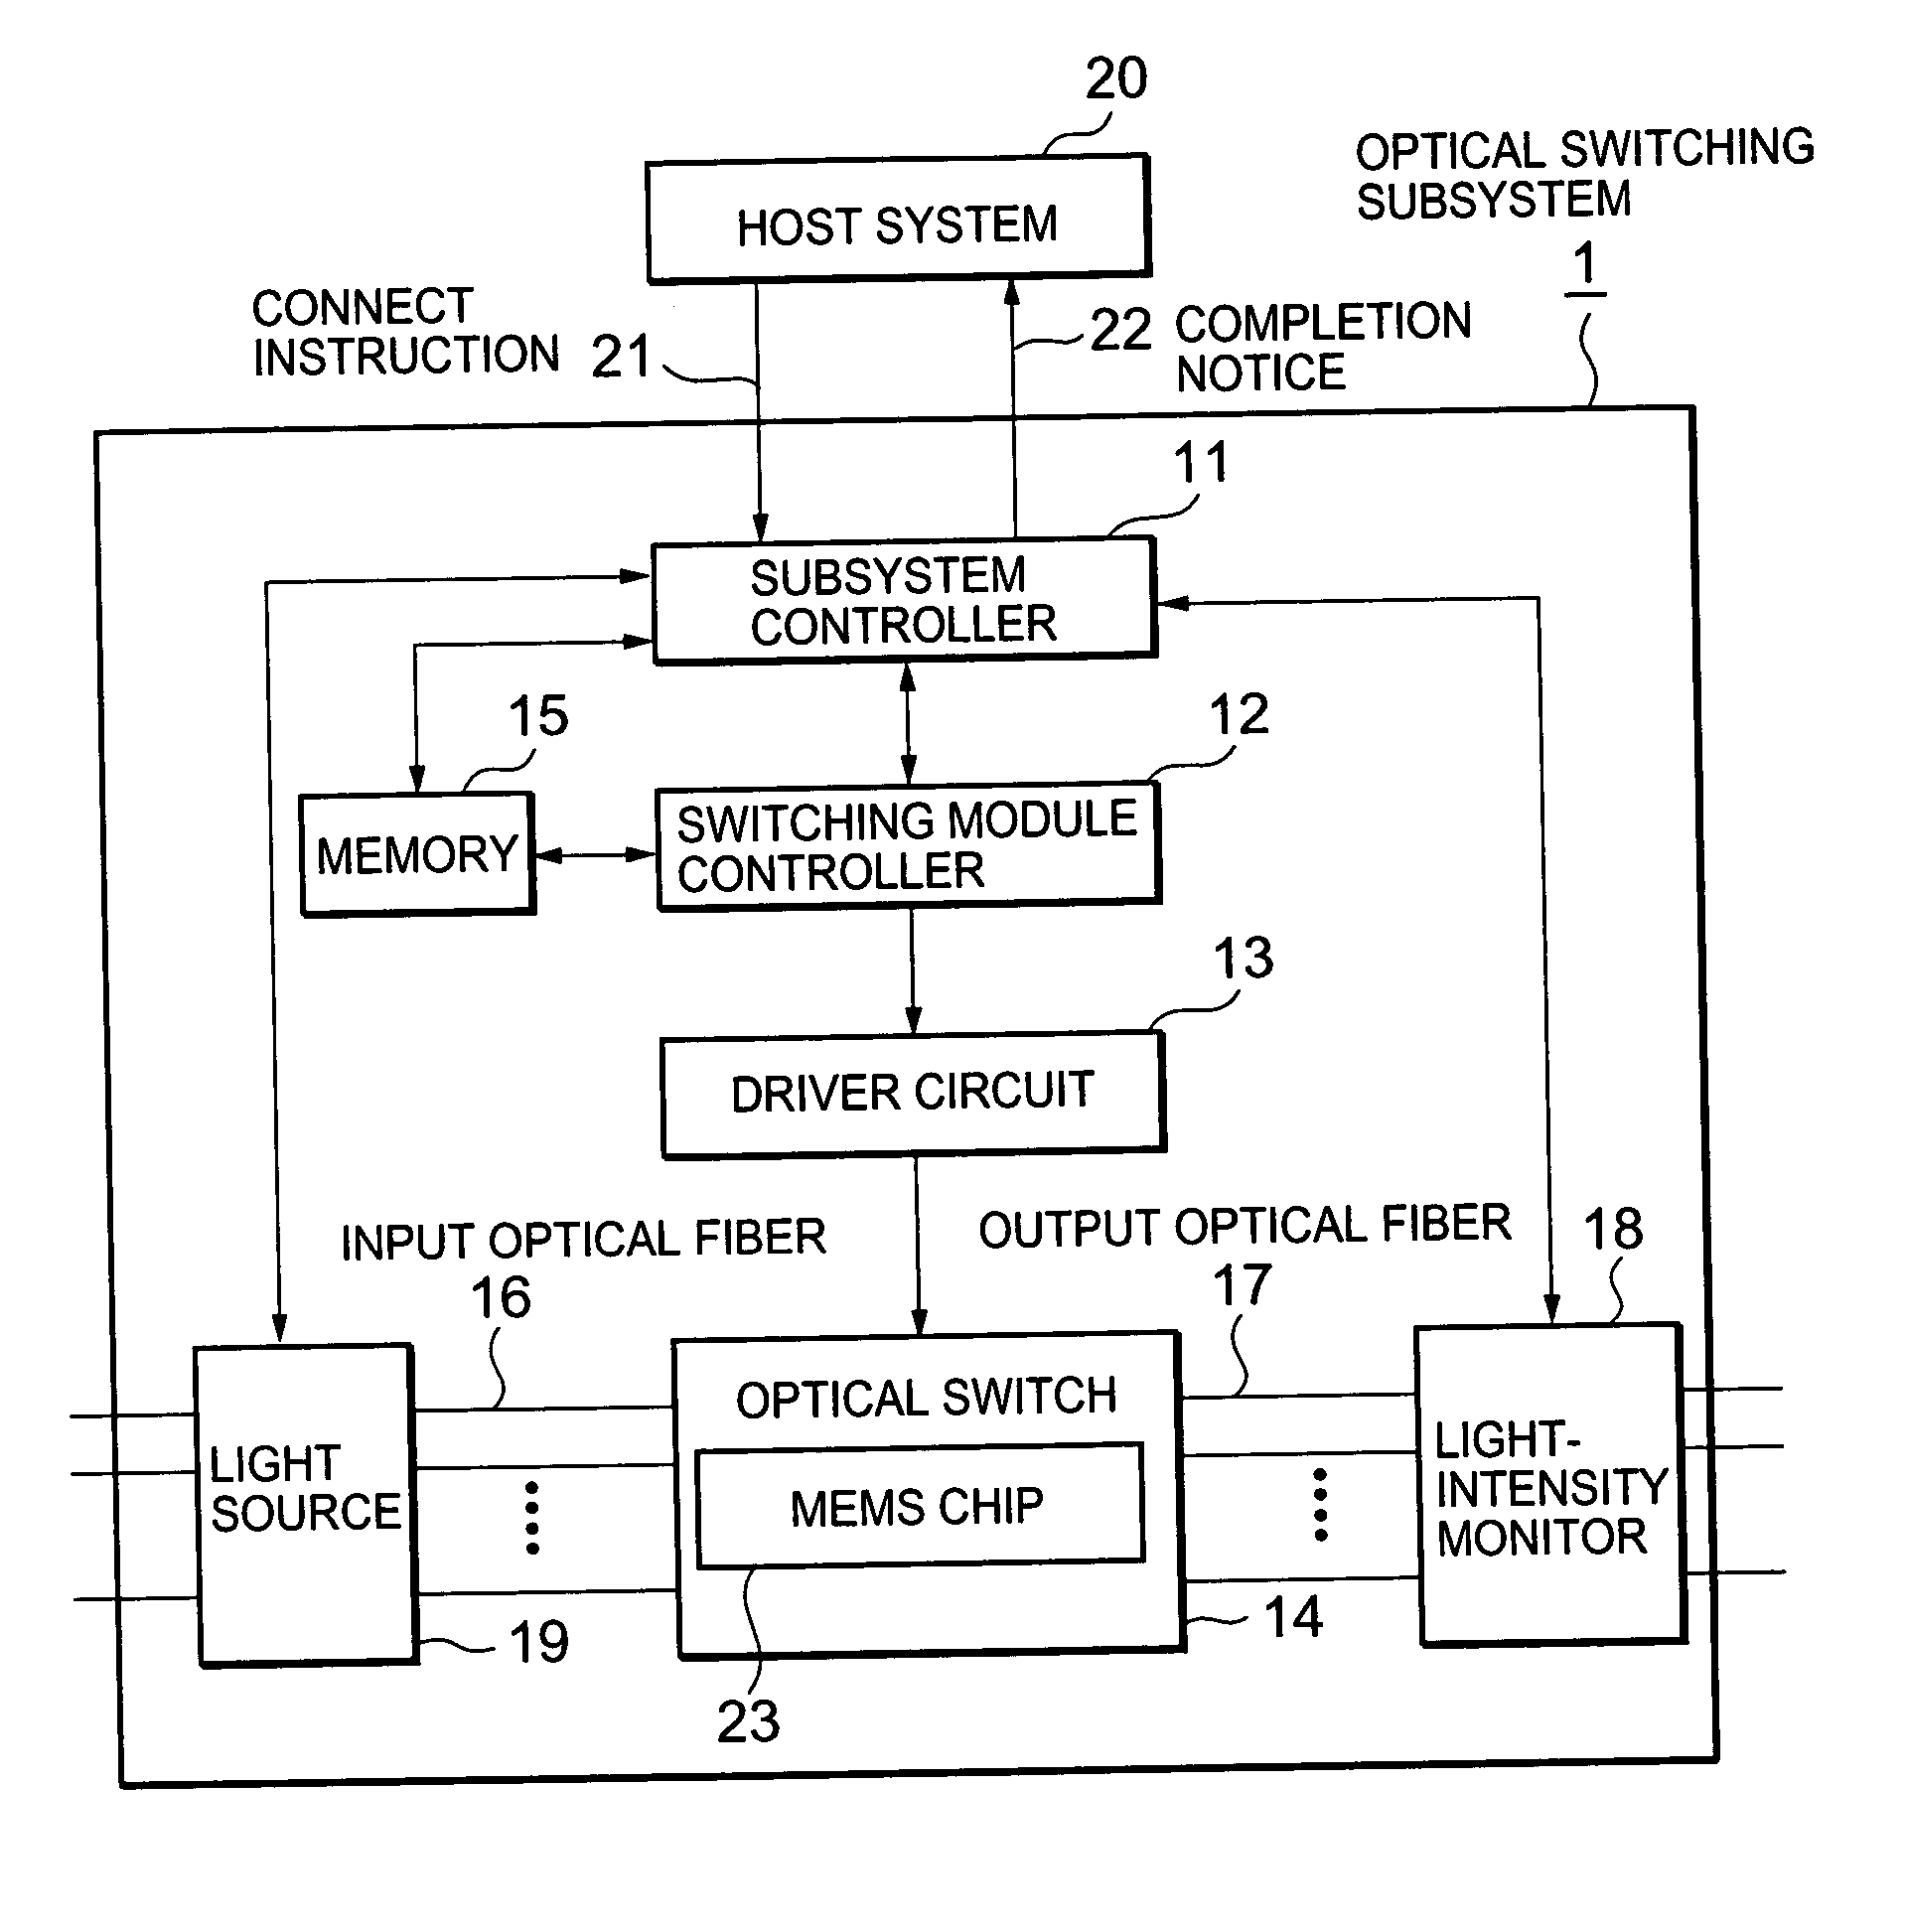 Optical switching subsystem and optical switching subsystem self-diagnosing method